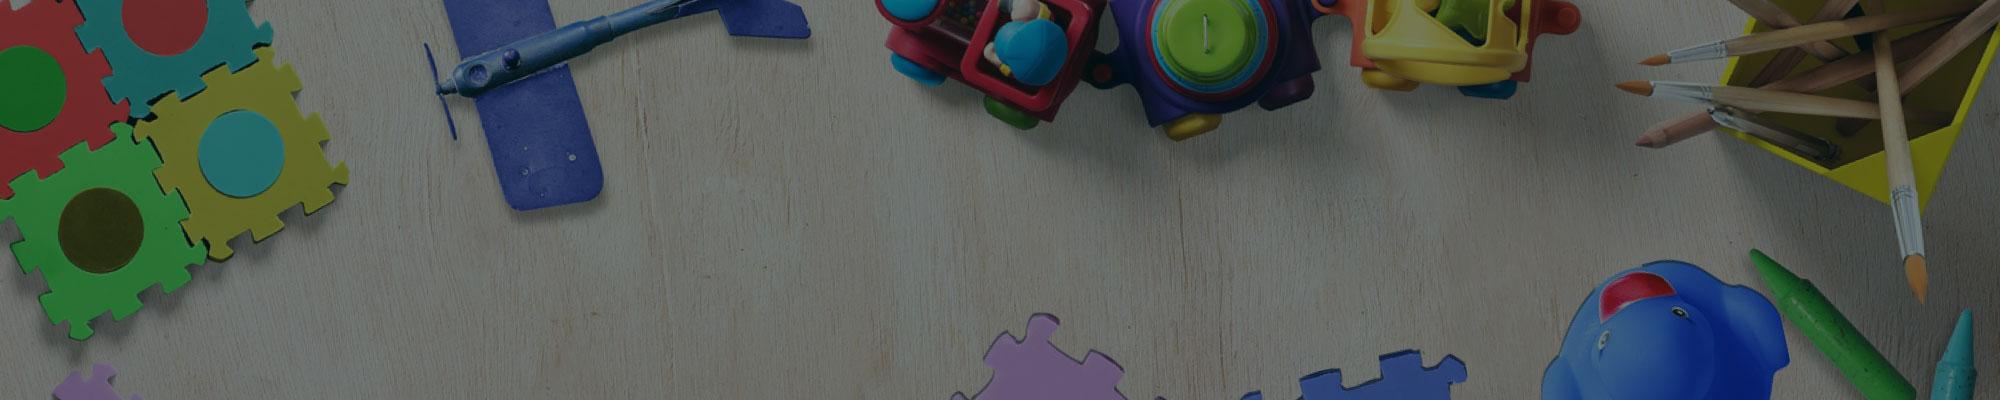 Image of toys